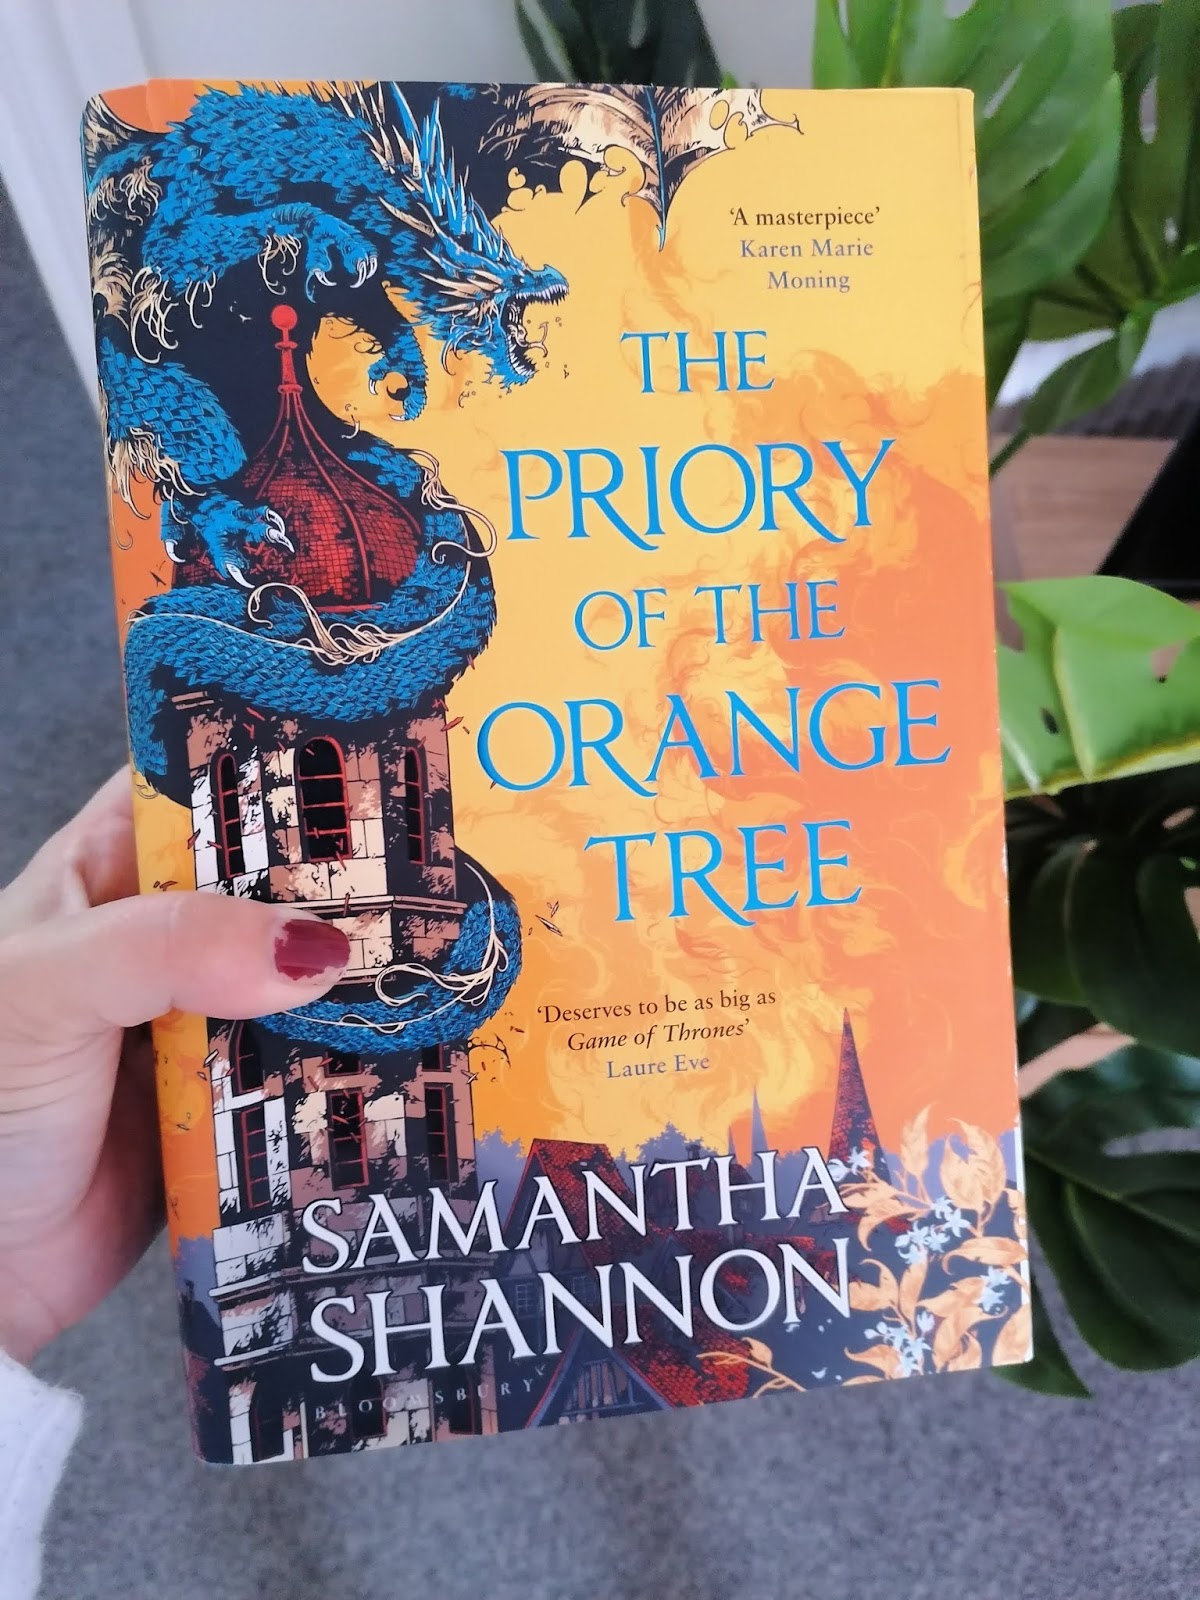 Book review - The priory of the Orange Tree - Samantha Shannon 